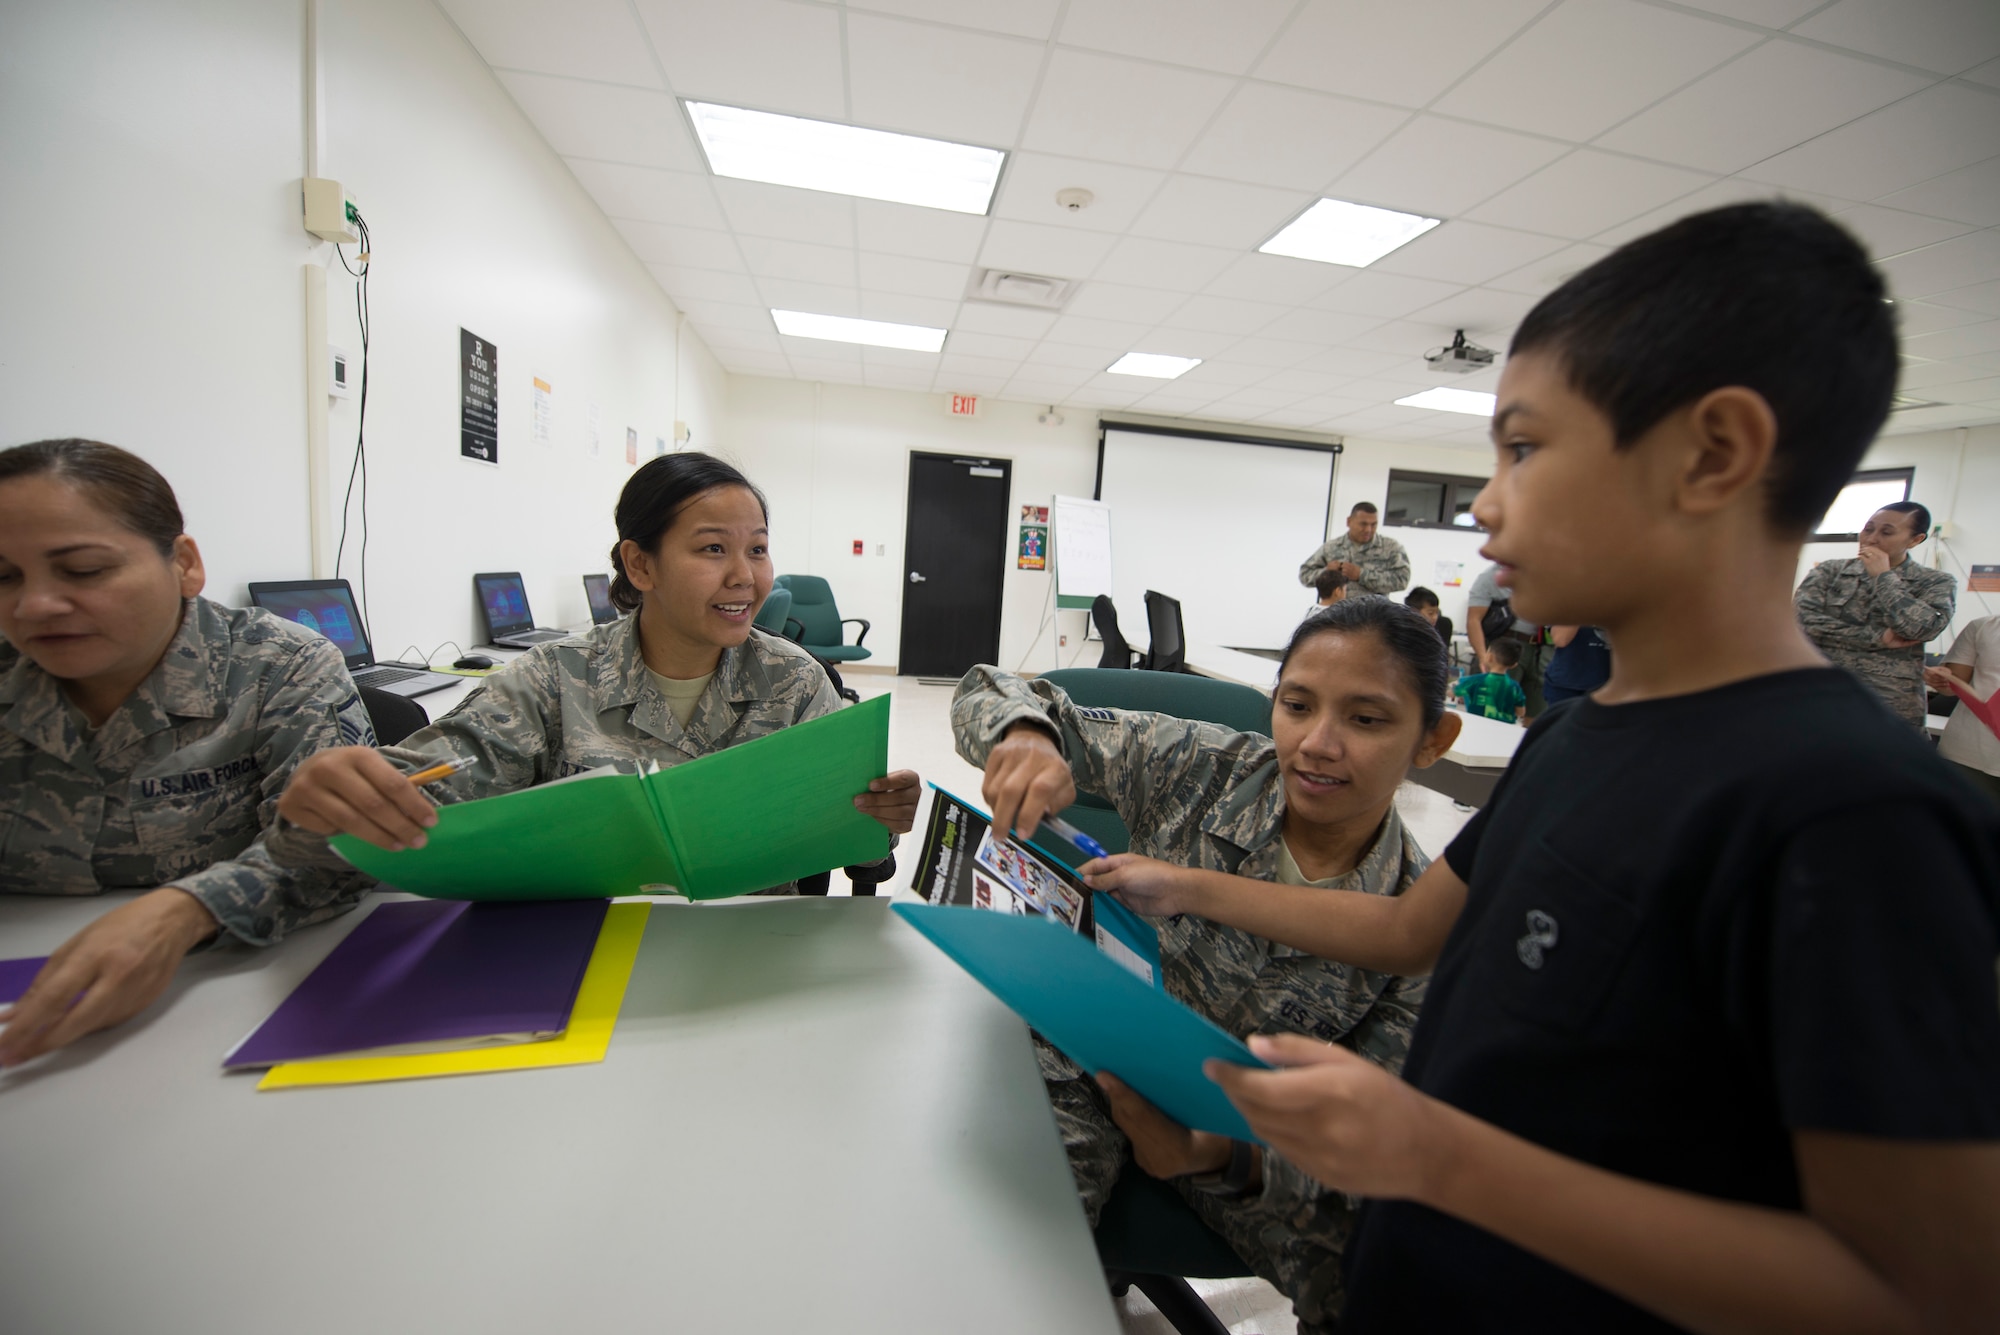 U.S. Air Force Staff Sgts. Kaolanie Claros, center, and Sofia Oropesa, right, both assigned to the U.S. Air Force Reserve’s 44th Aerial Port Squadron, introduce military children to readiness activities during Operation Inafa’ Maolek at Andersen Air Force Base, May 5, 2018.